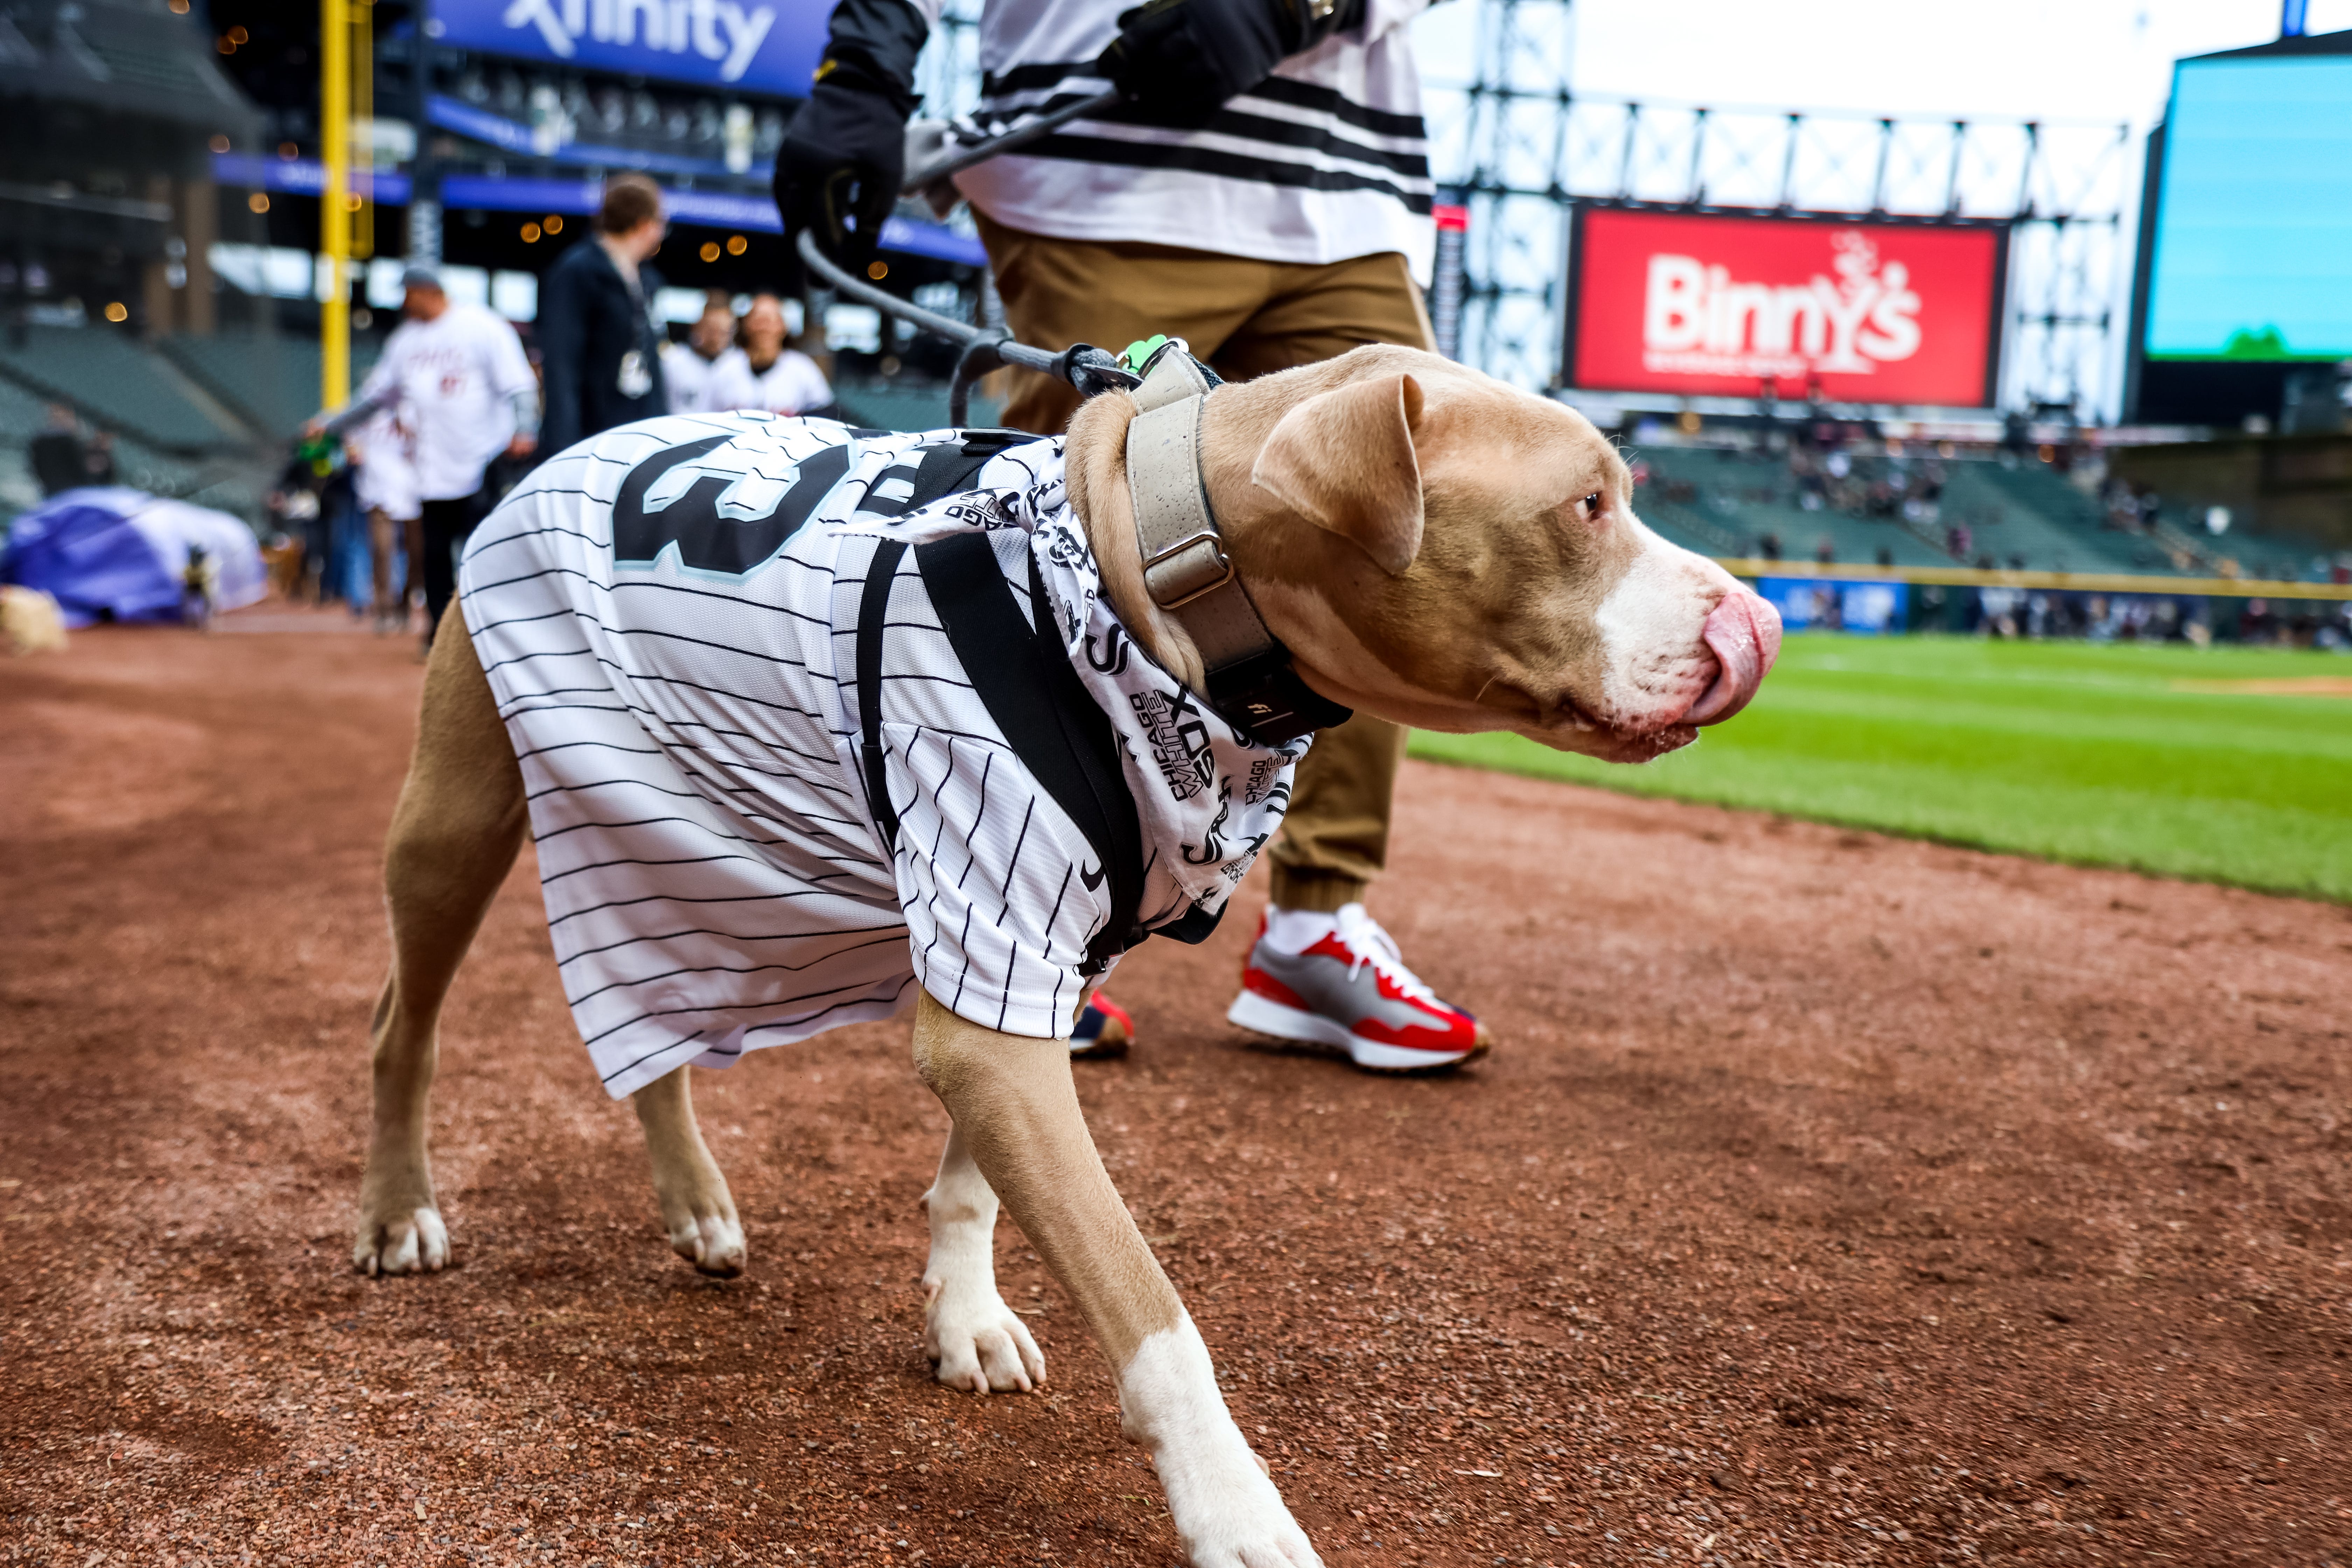 Dog Day at Guaranteed Rate Field - Inside the White Sox